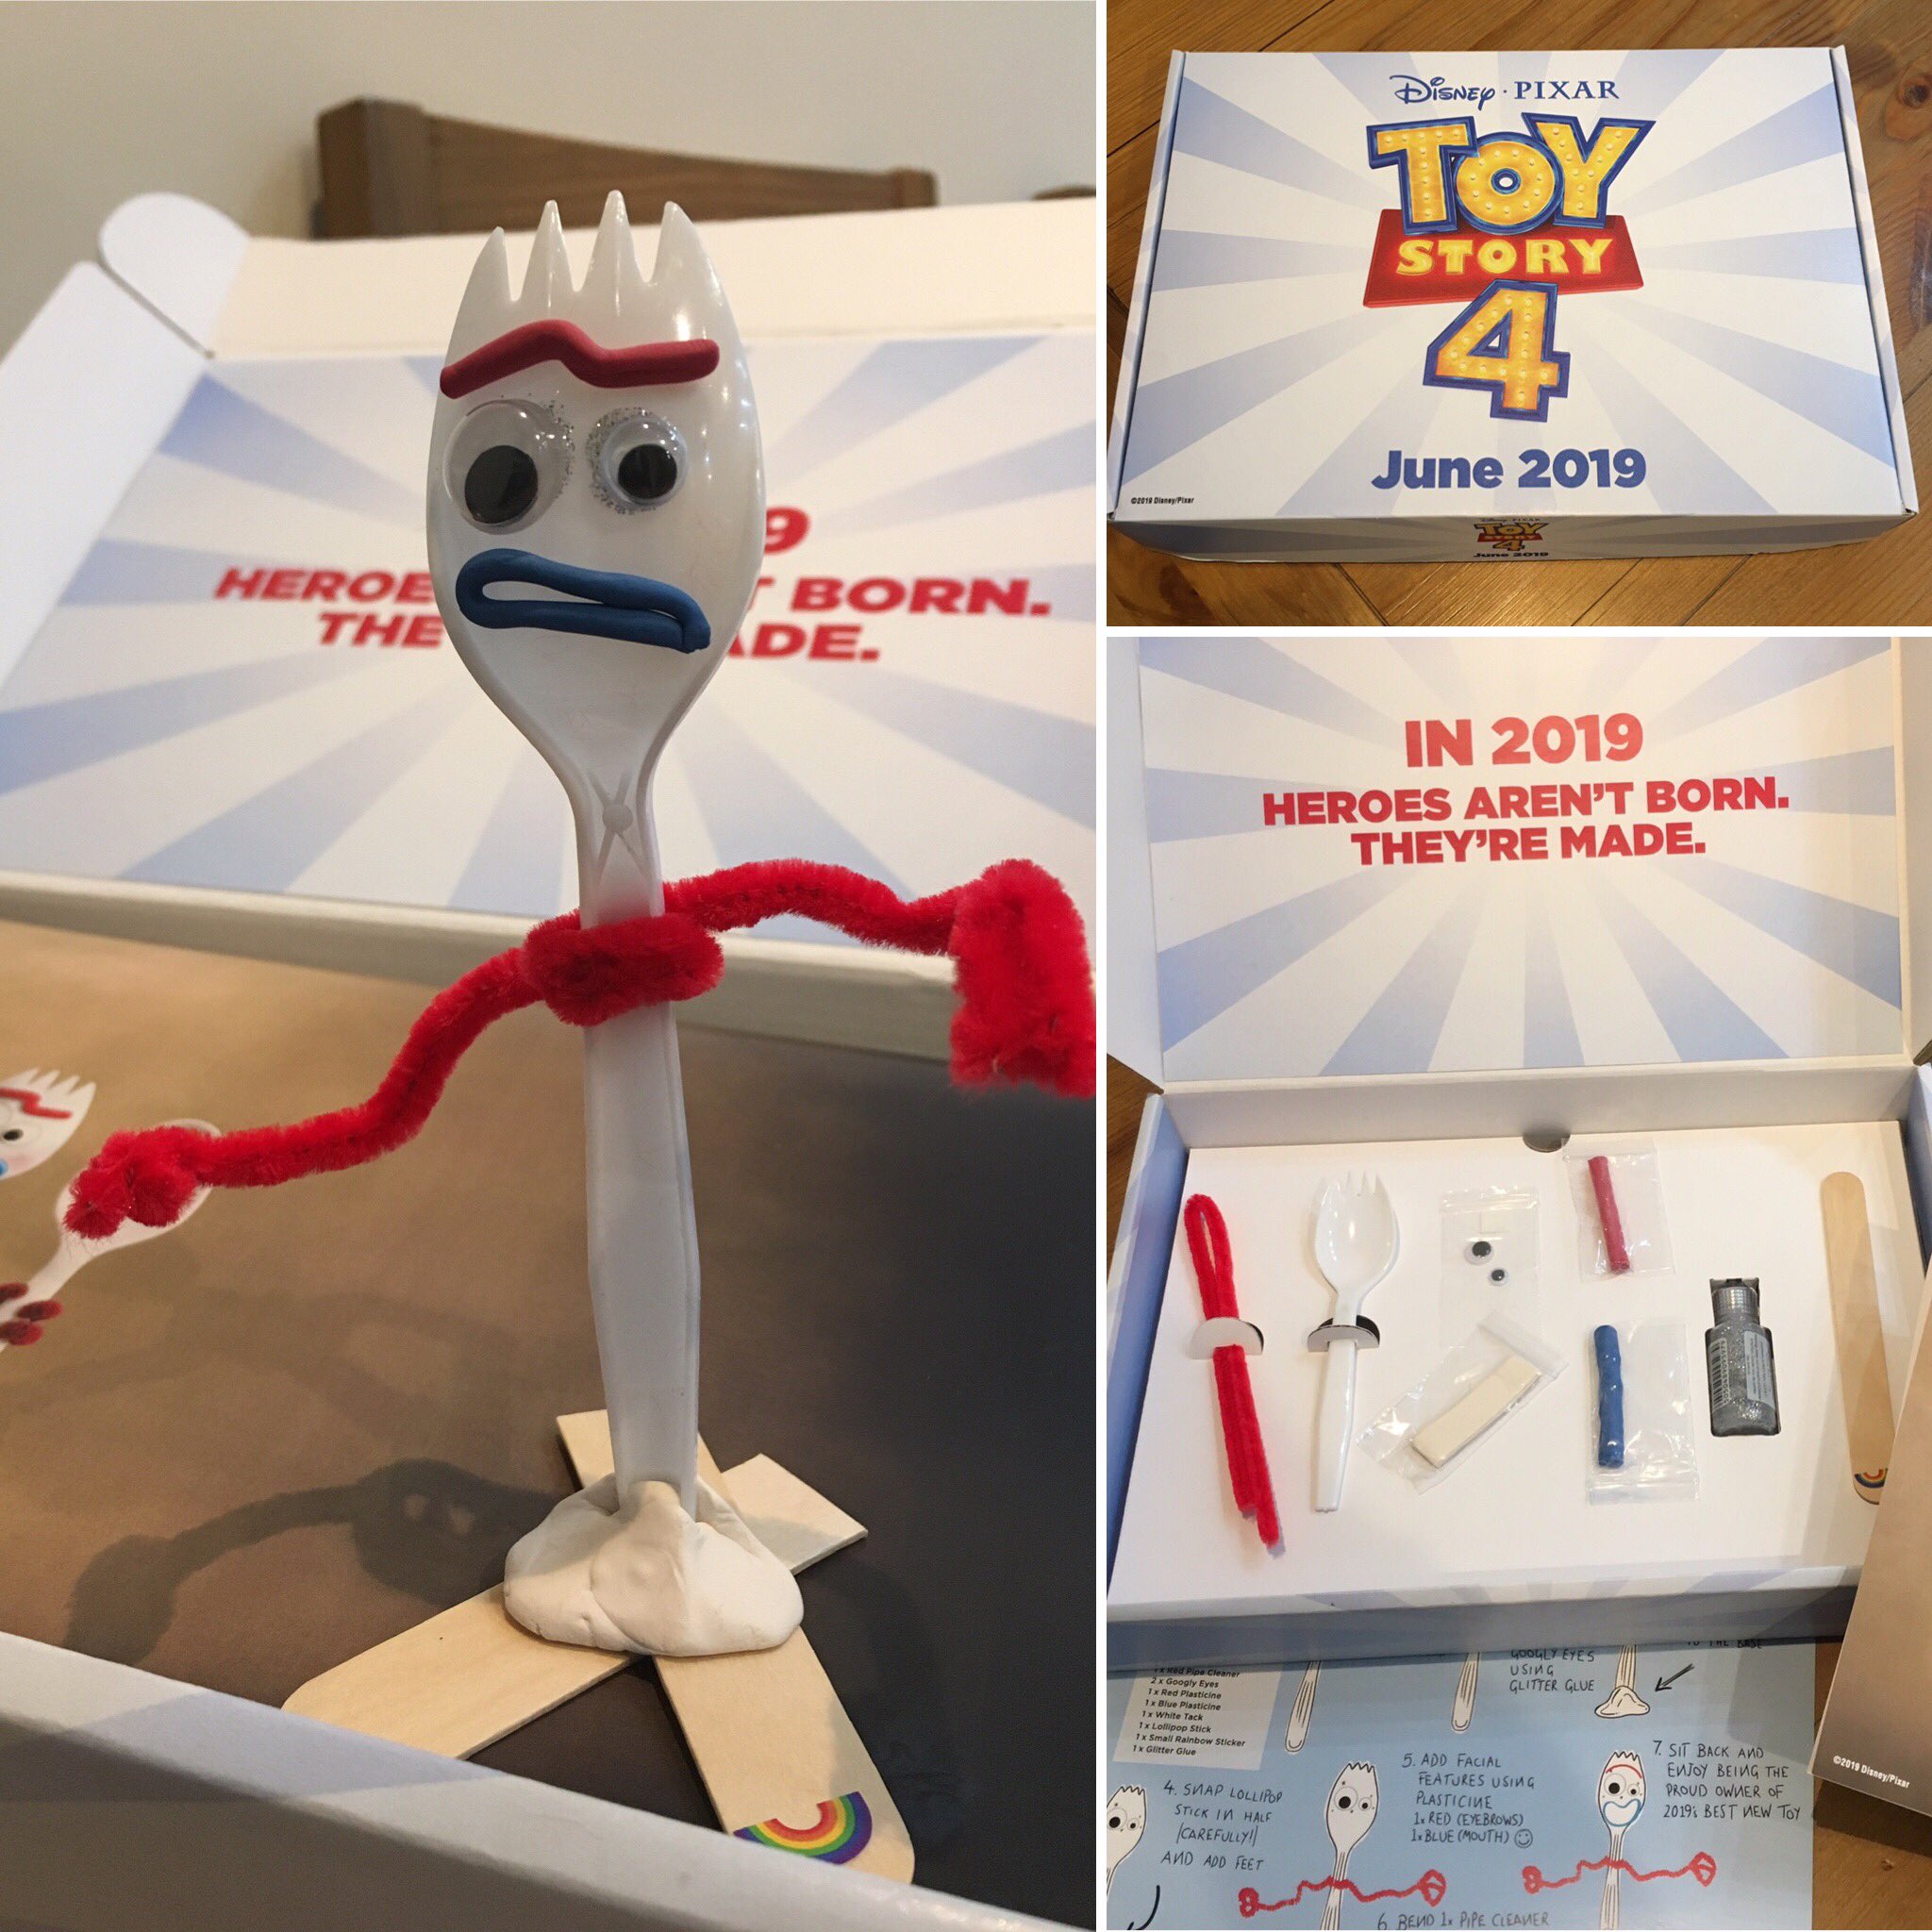 Total Film on X: We've been sent a make-your-own Forky kit for